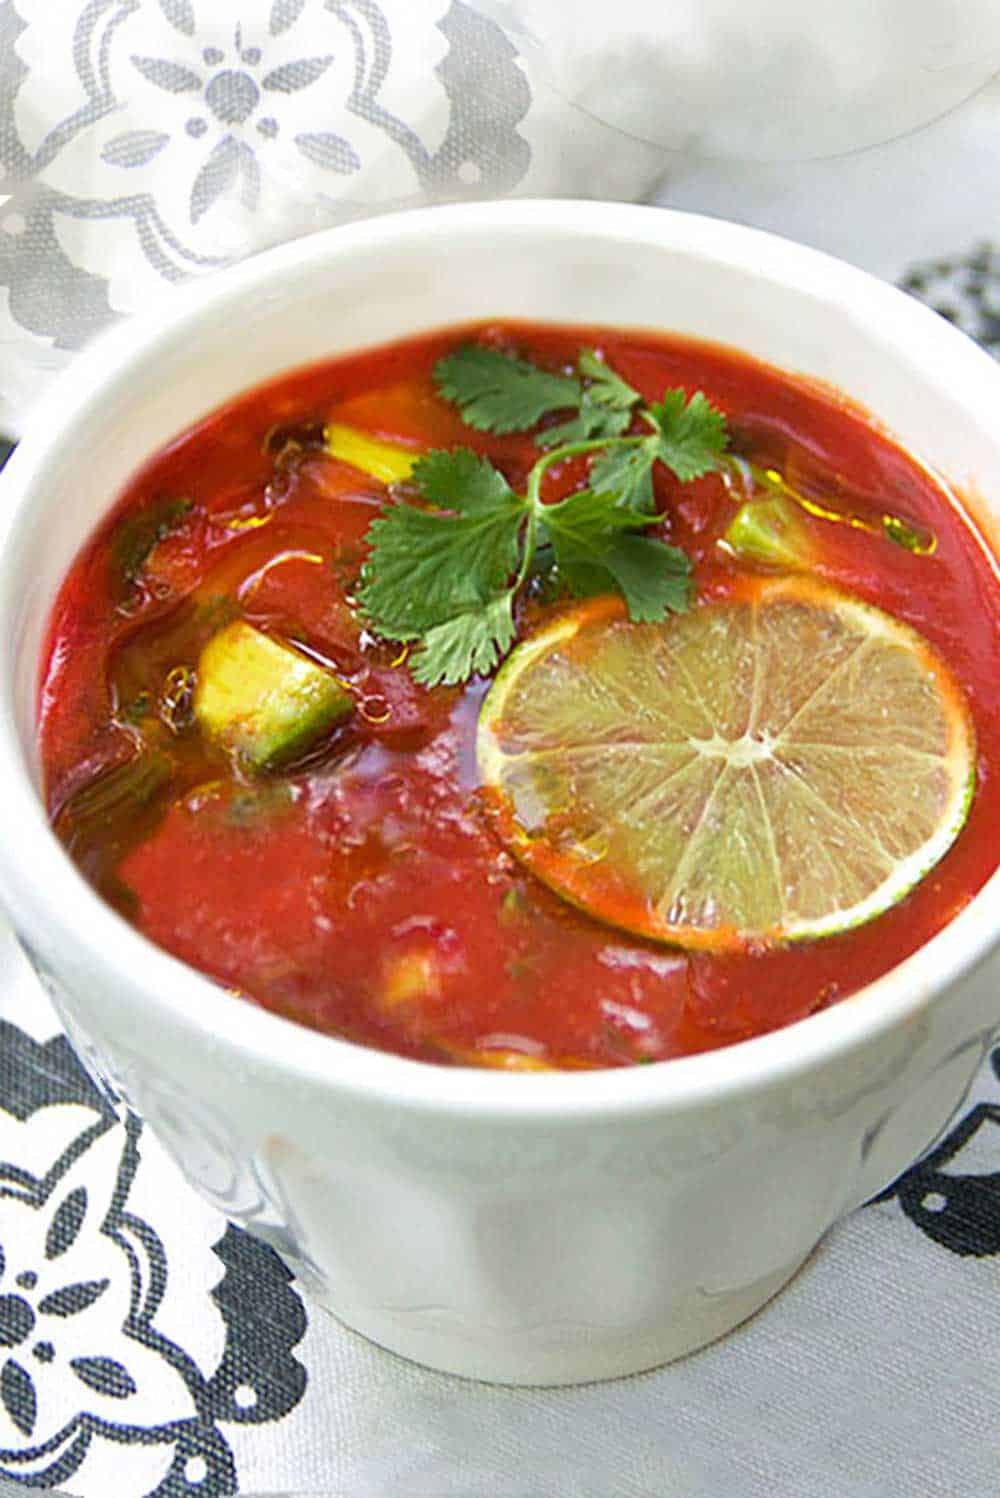 Spiced up tomato juice with cubed avocado, cilantro, garlic and lime juice makes the BEST quick and easy gazpacho! This delicious cold tomato soup is ready in 15 minutes. Ladle it into bowls and garnish with a generous drizzle of extra virgin olive oil and a thin slice of fresh lime.